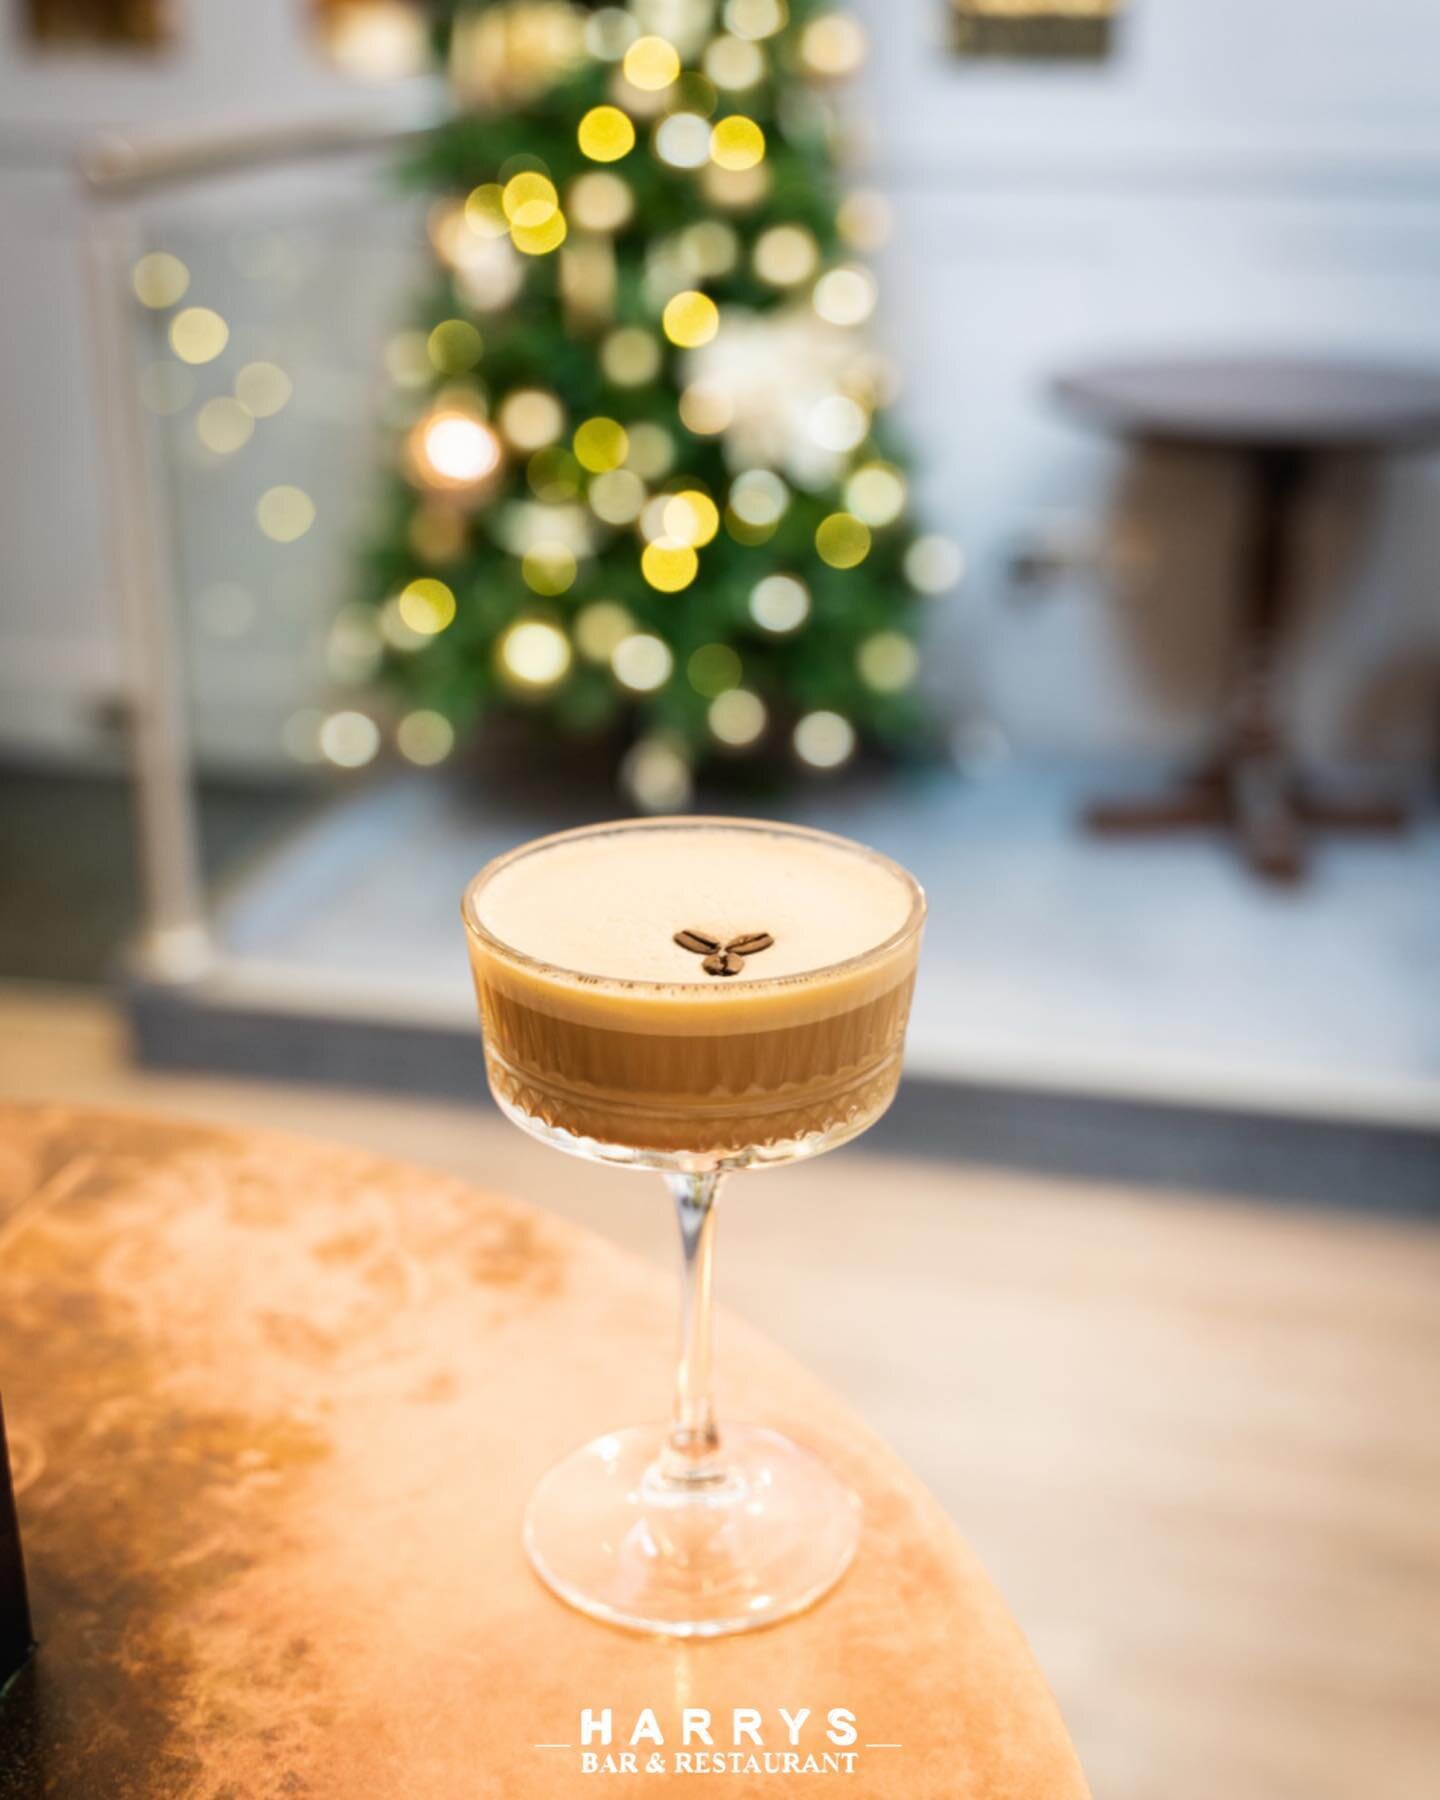 Baileys Espresso Martini ☕️

This weekends festive cocktail of the week 🎄 

We will be serving these all day Sunday for the Billericay Christmas market - be sure to pop in and give them a try ✨